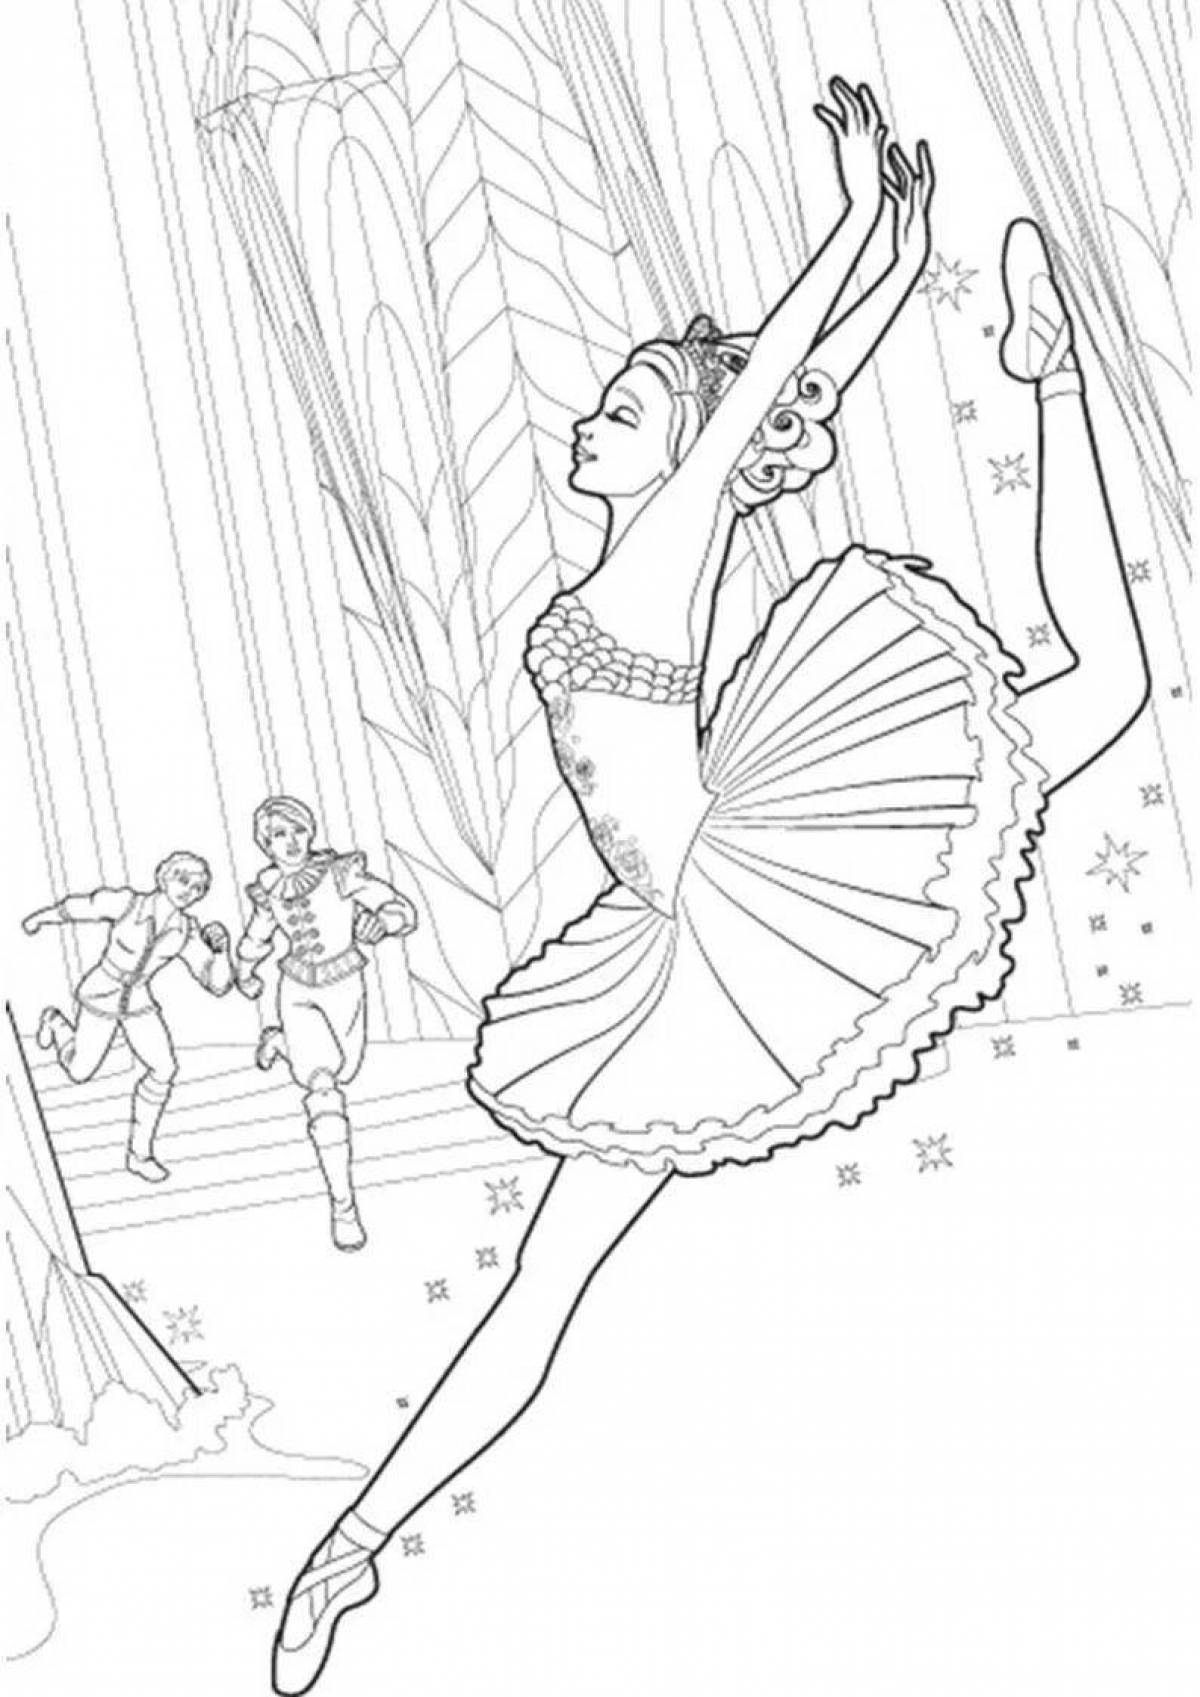 Colorful barbie ballerina coloring page